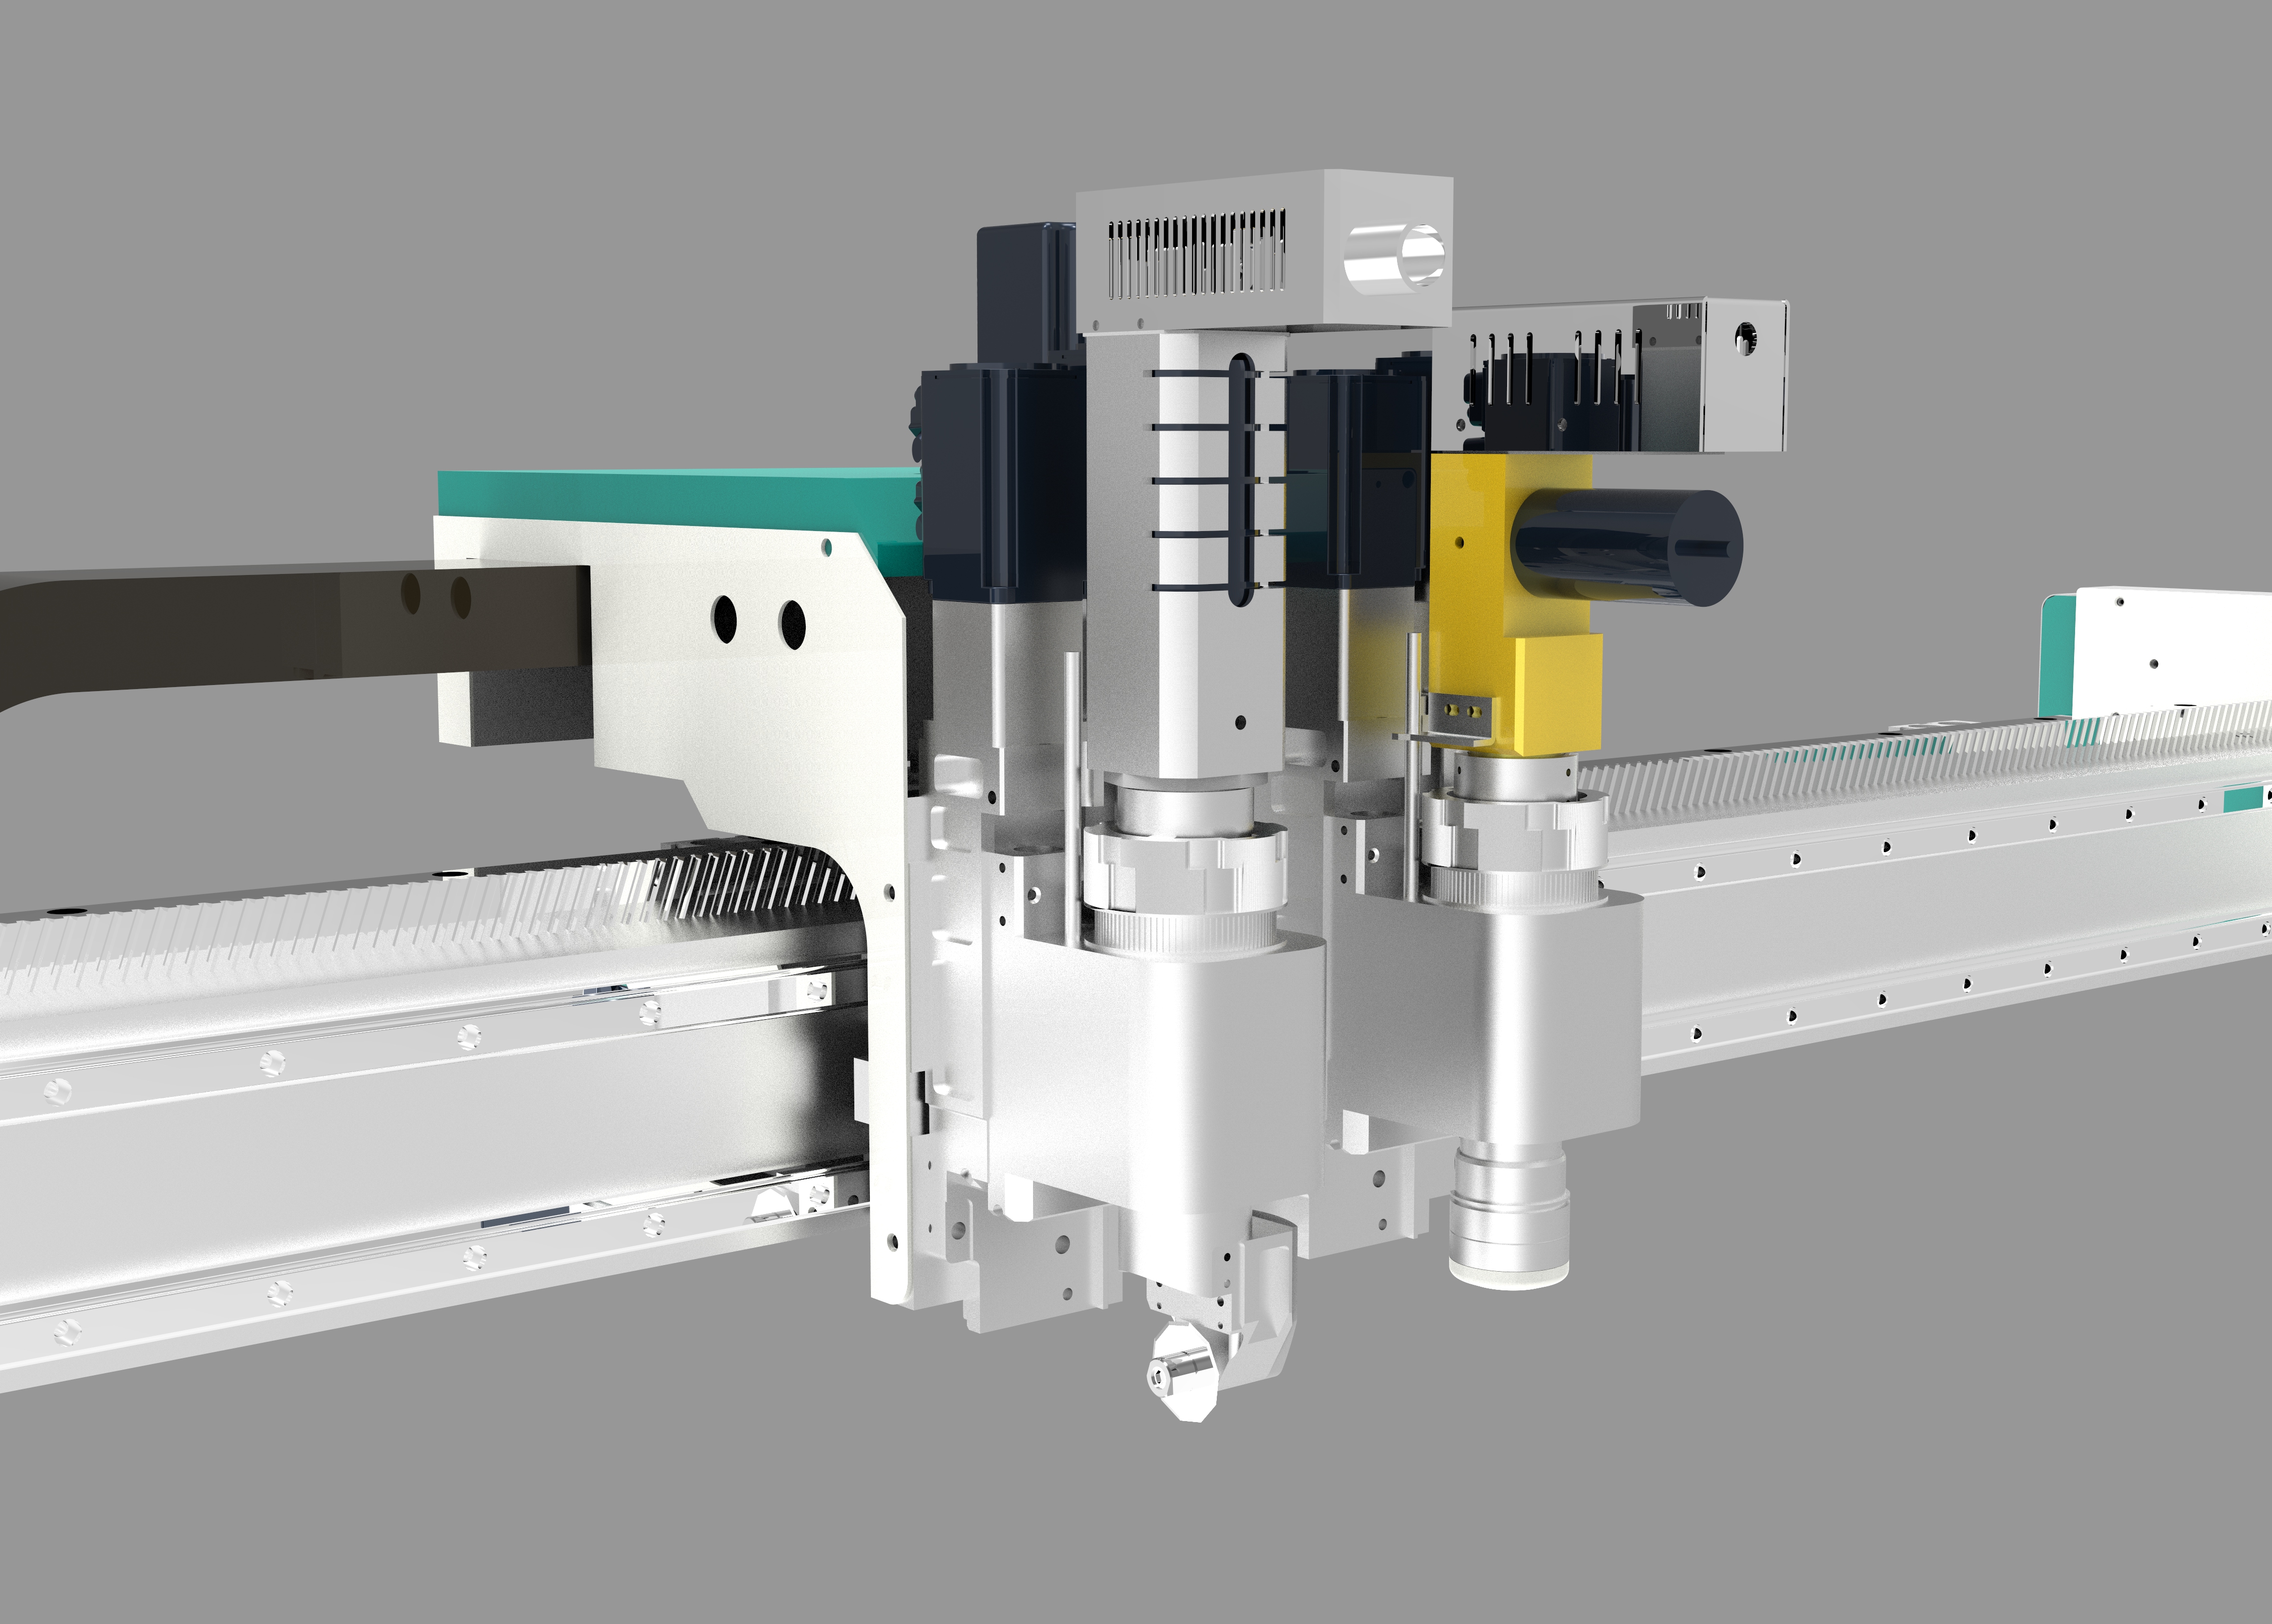 How much do you know about the drag tool used in CNC cutting machines?